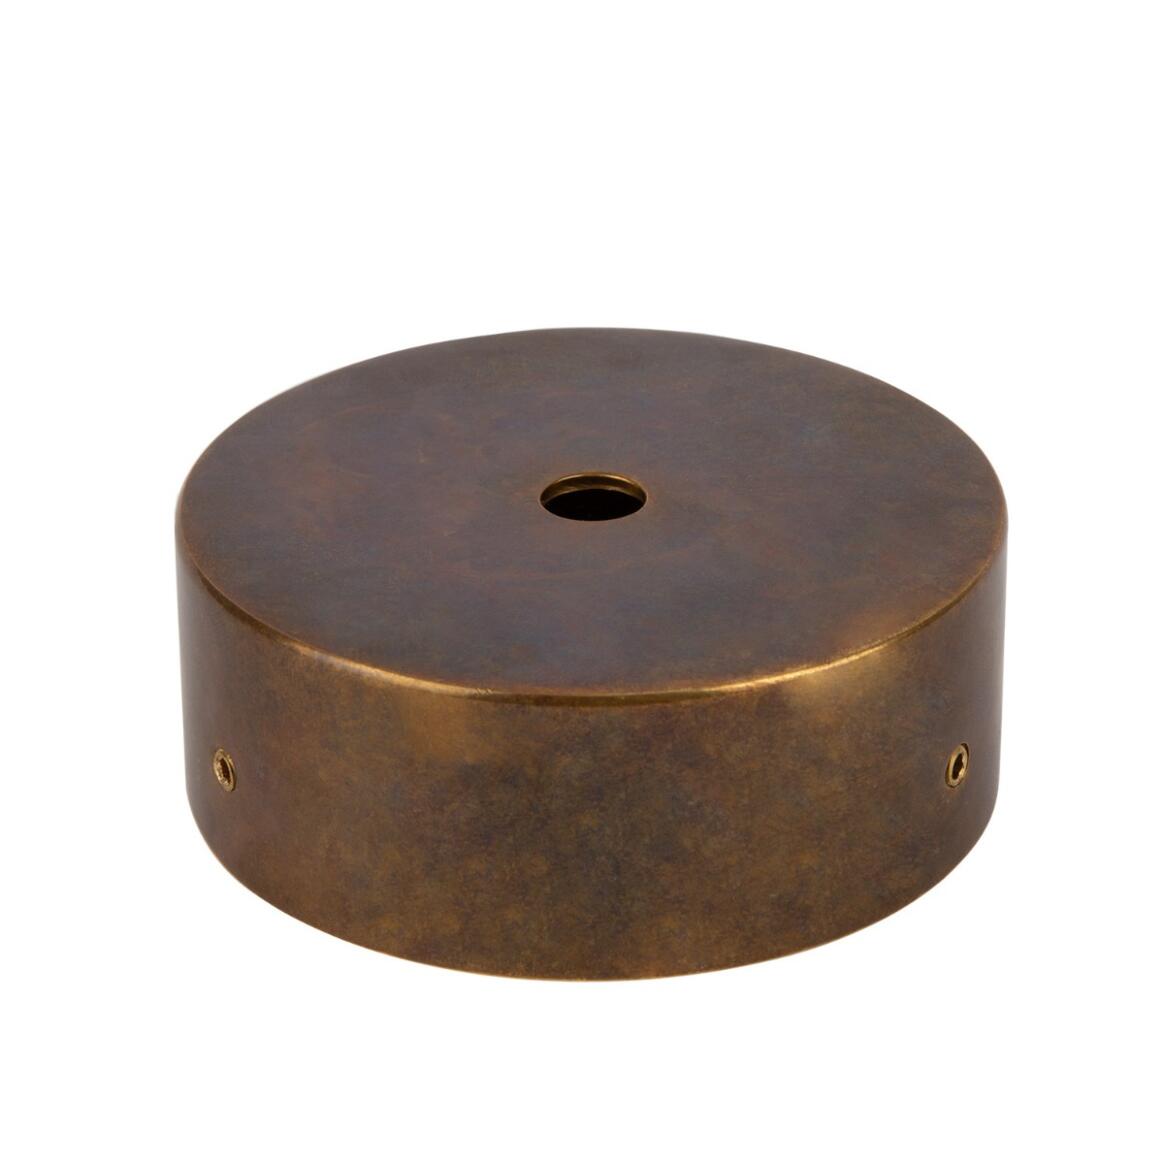 Brass IP Wall Plate 8.5cm, Two-Part main product image